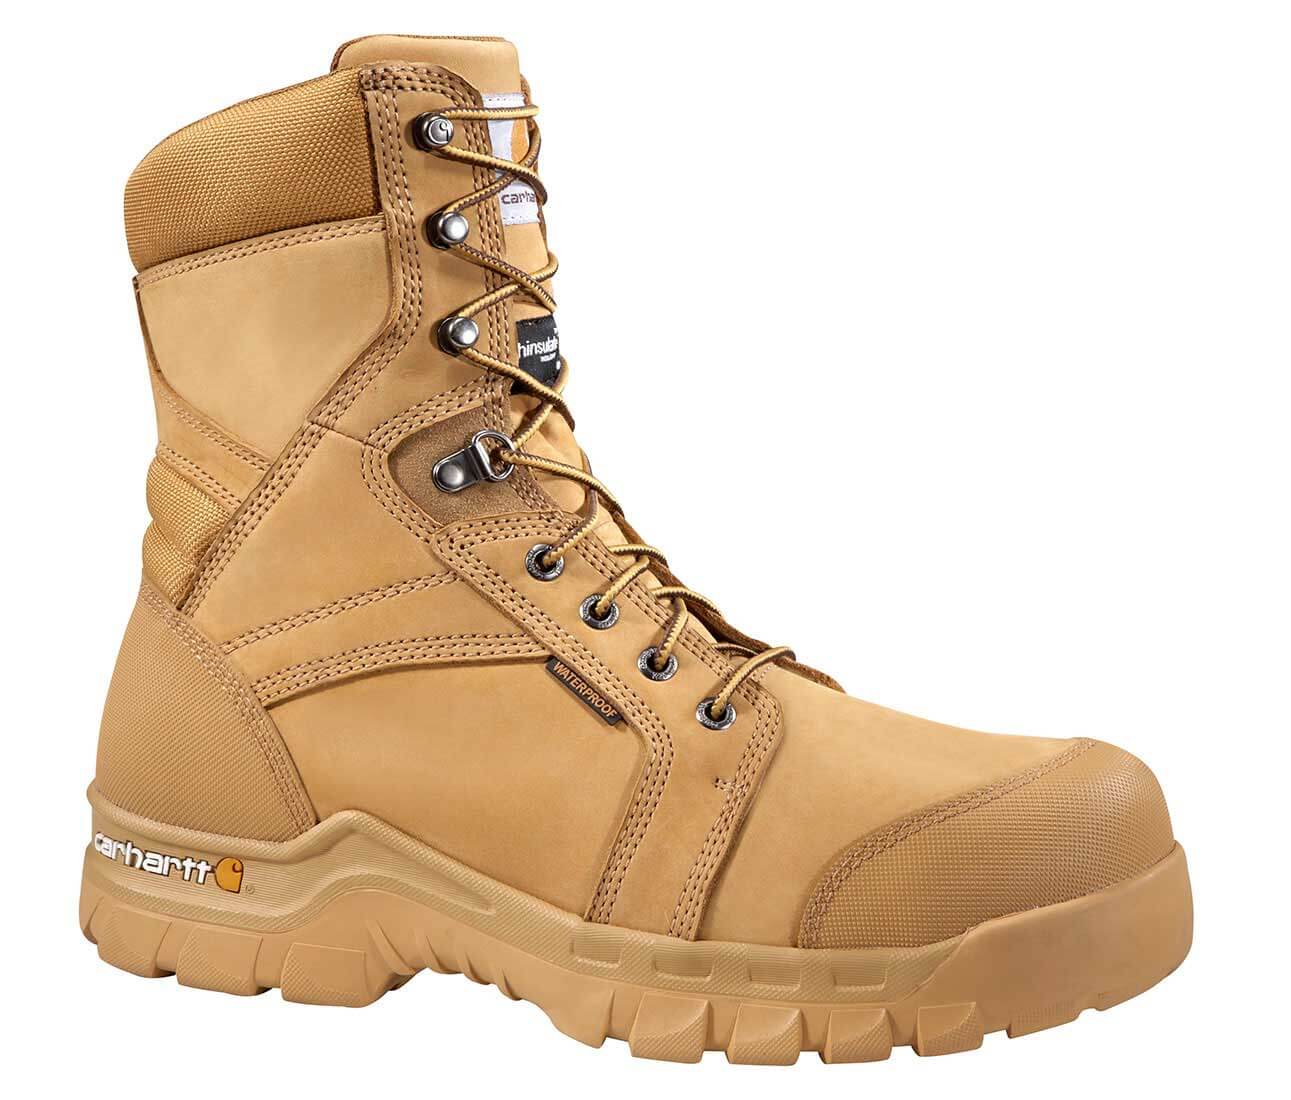 Carhartt - CMF8058 - Rugged Flex Men's Wheat Leather Waterproof Insulated Soft Toe 8 Lace-up Work Boot